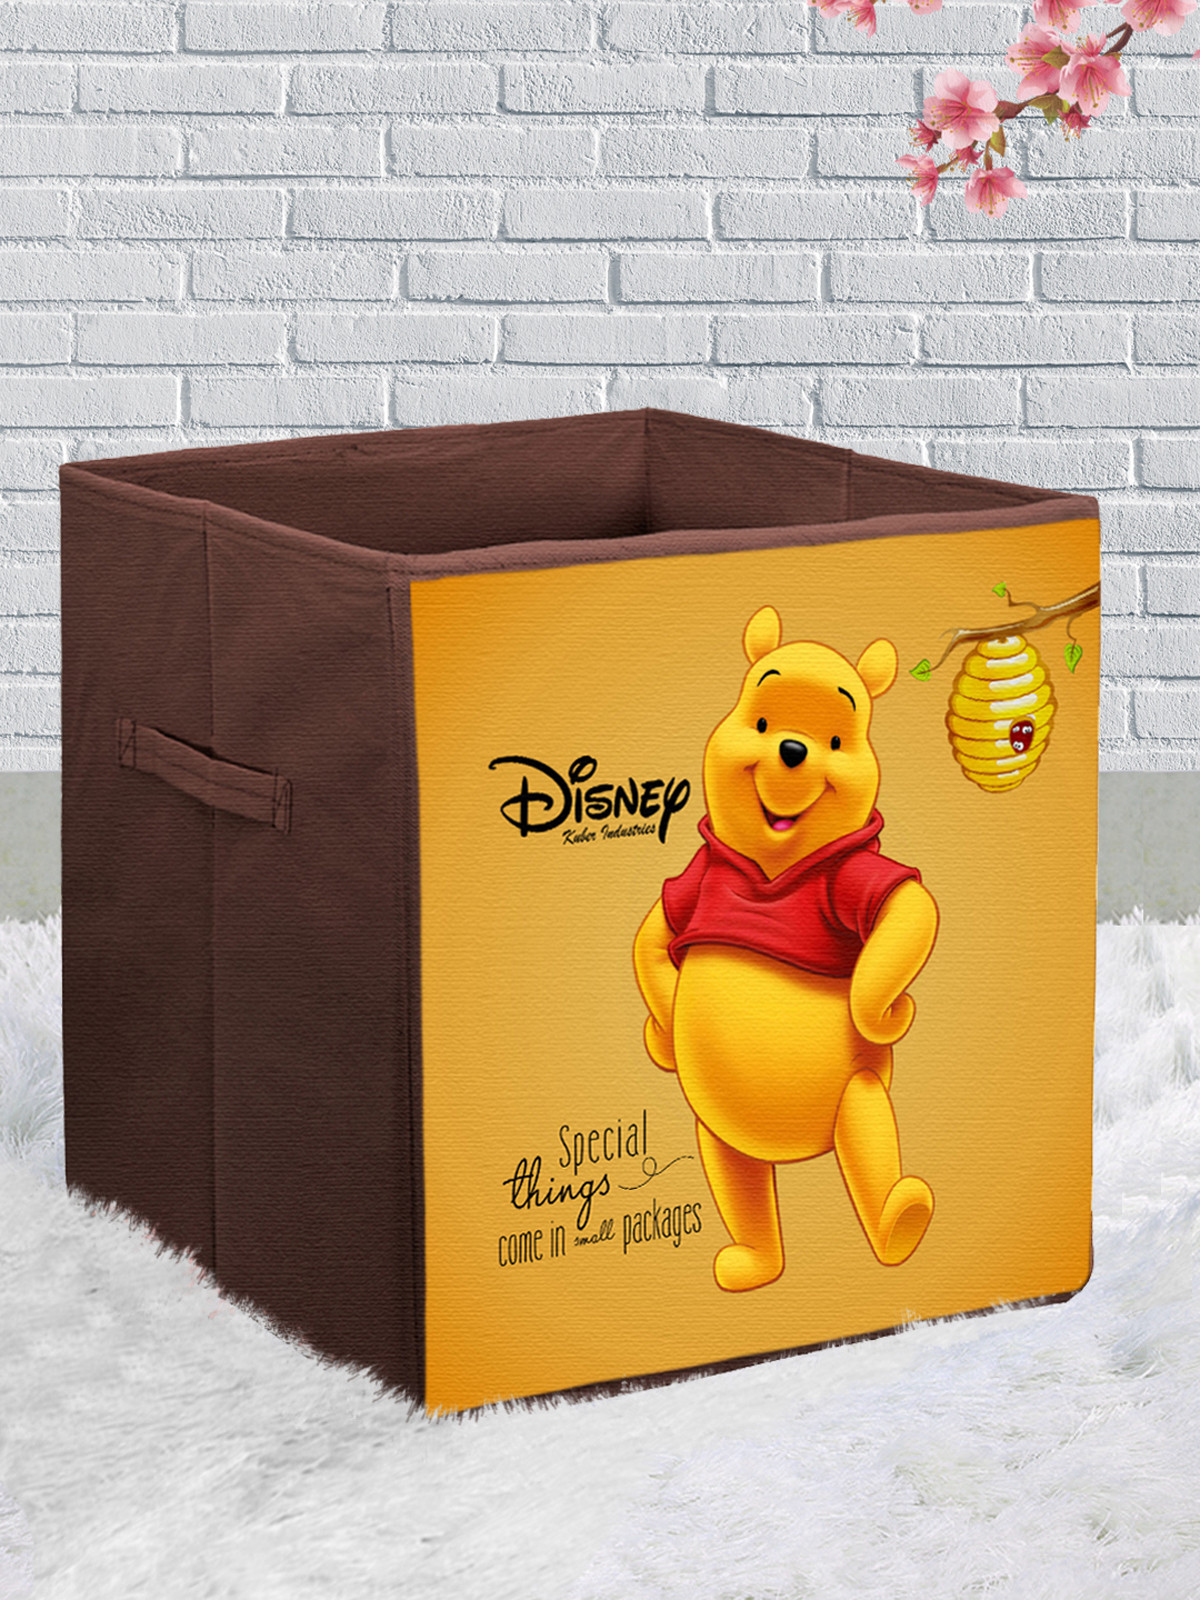 Kuber Industries Disney Winnie-The-Pooh & Mickey Print Non Woven Fabric Foldable Large Size Storage Cube Toy,Books,Shoes Storage Box With Handle (Maroon & Brown)